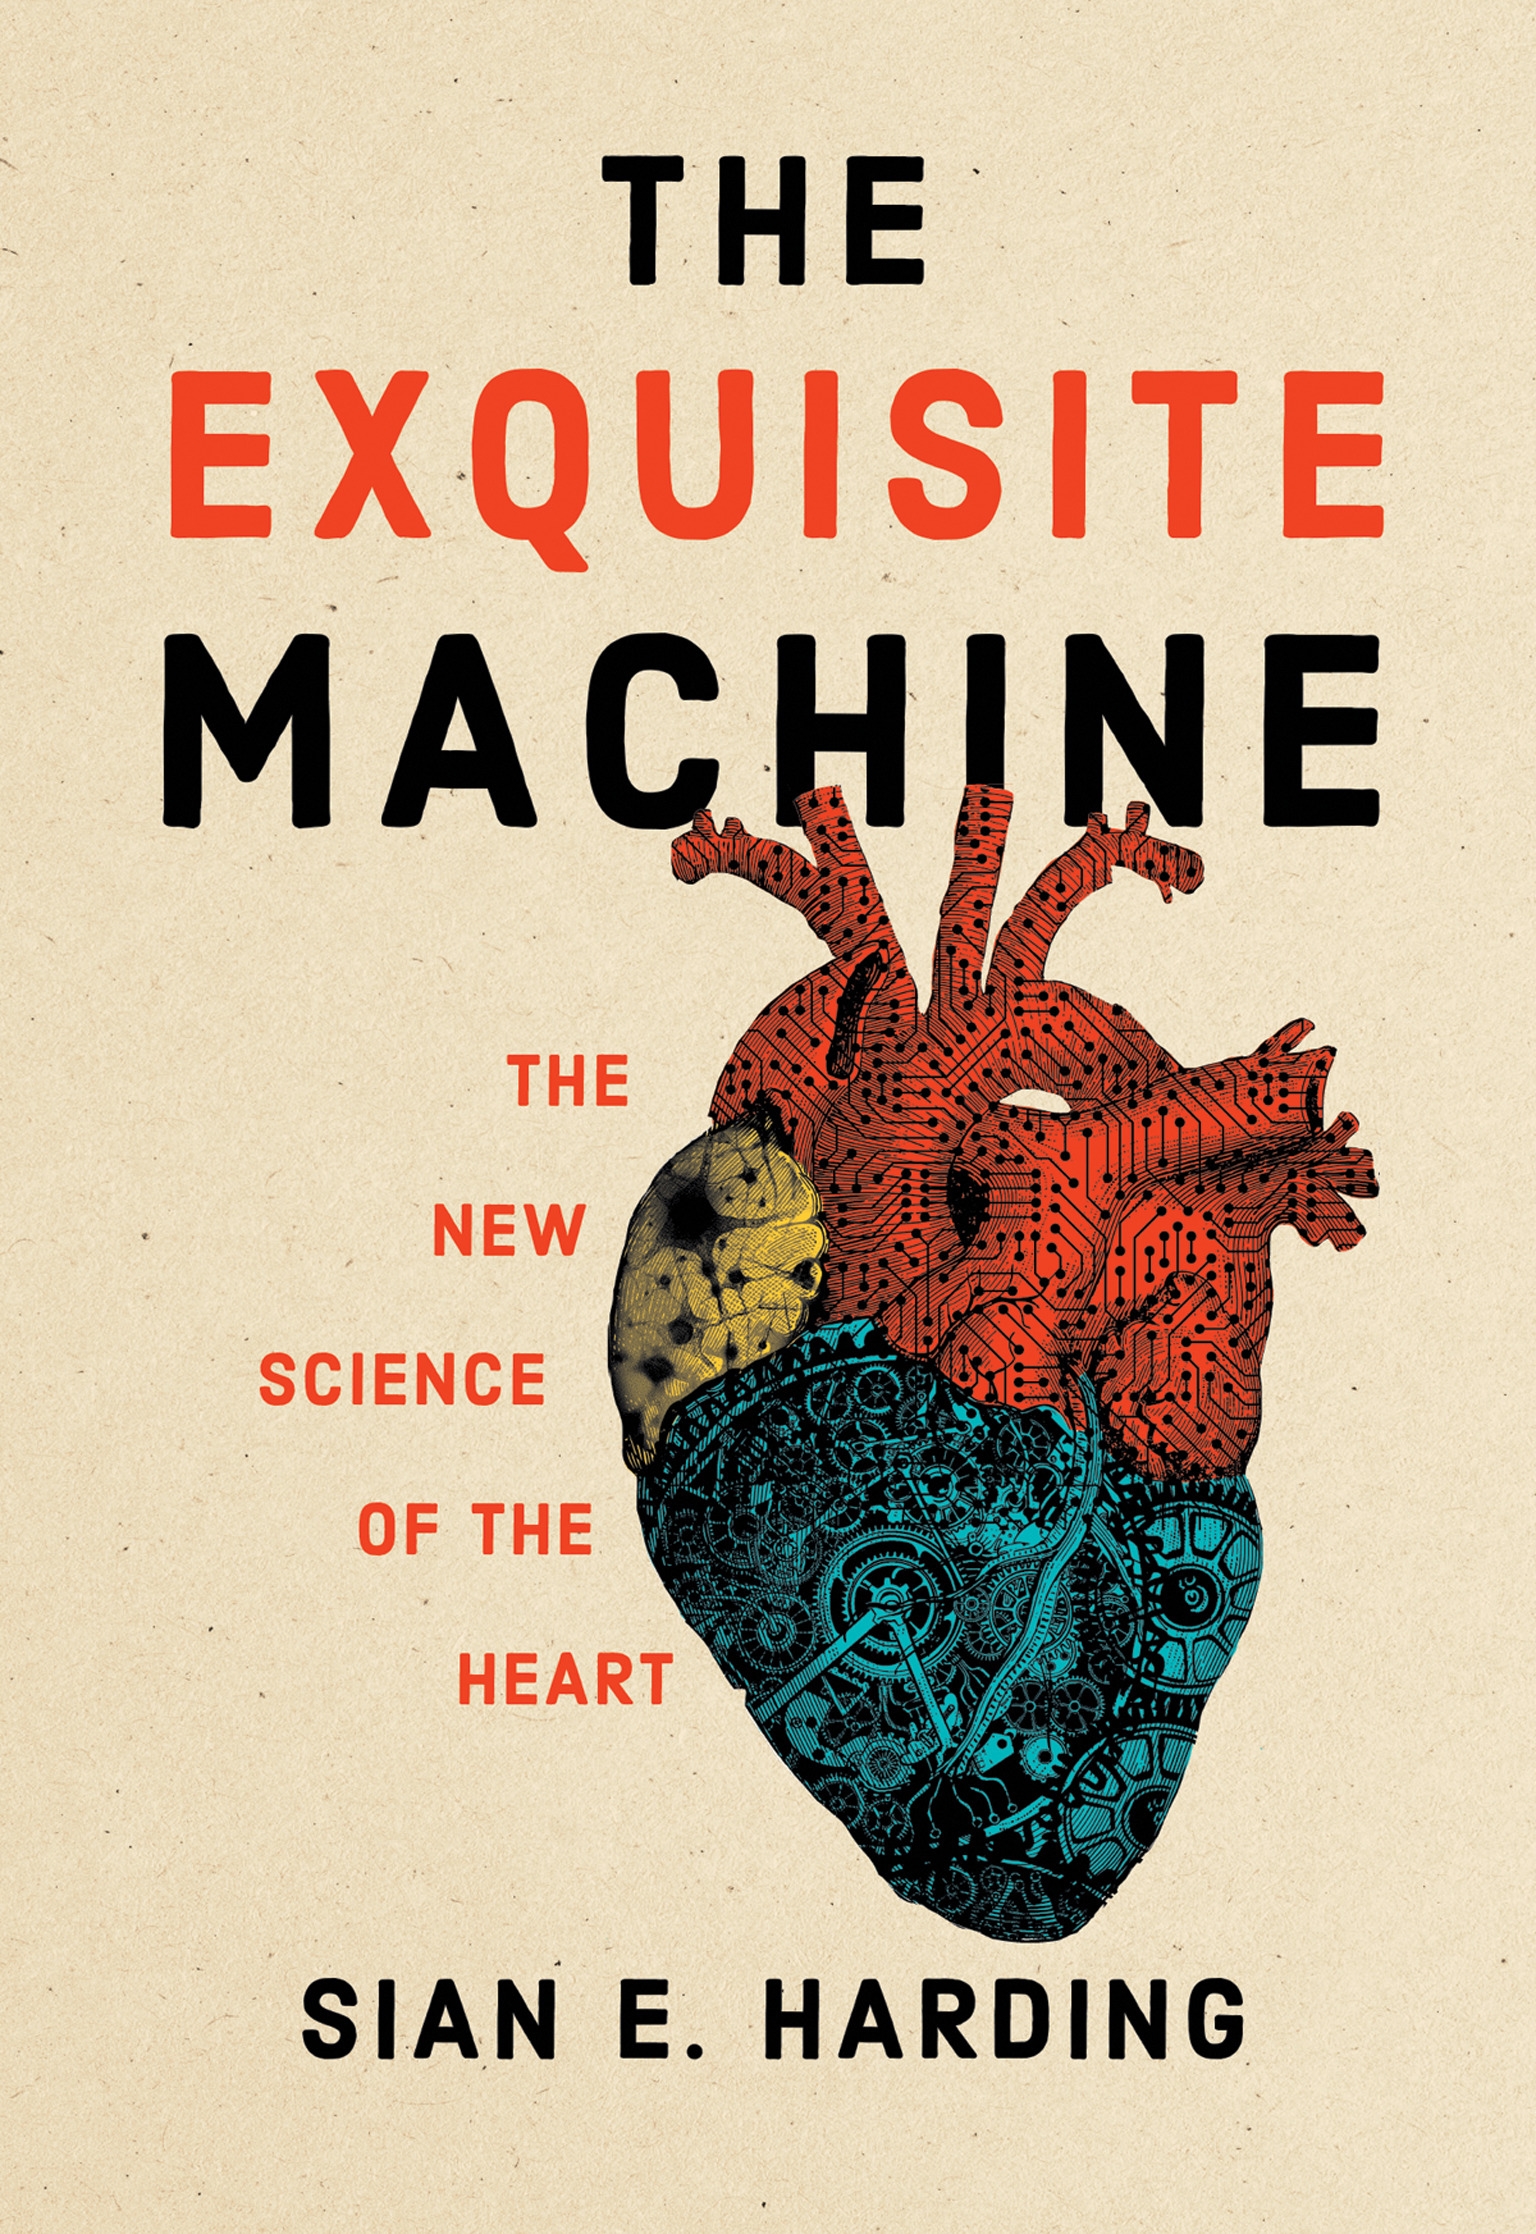 The Exquisite Machine by Sian E. Harding - Penguin Books New Zealand